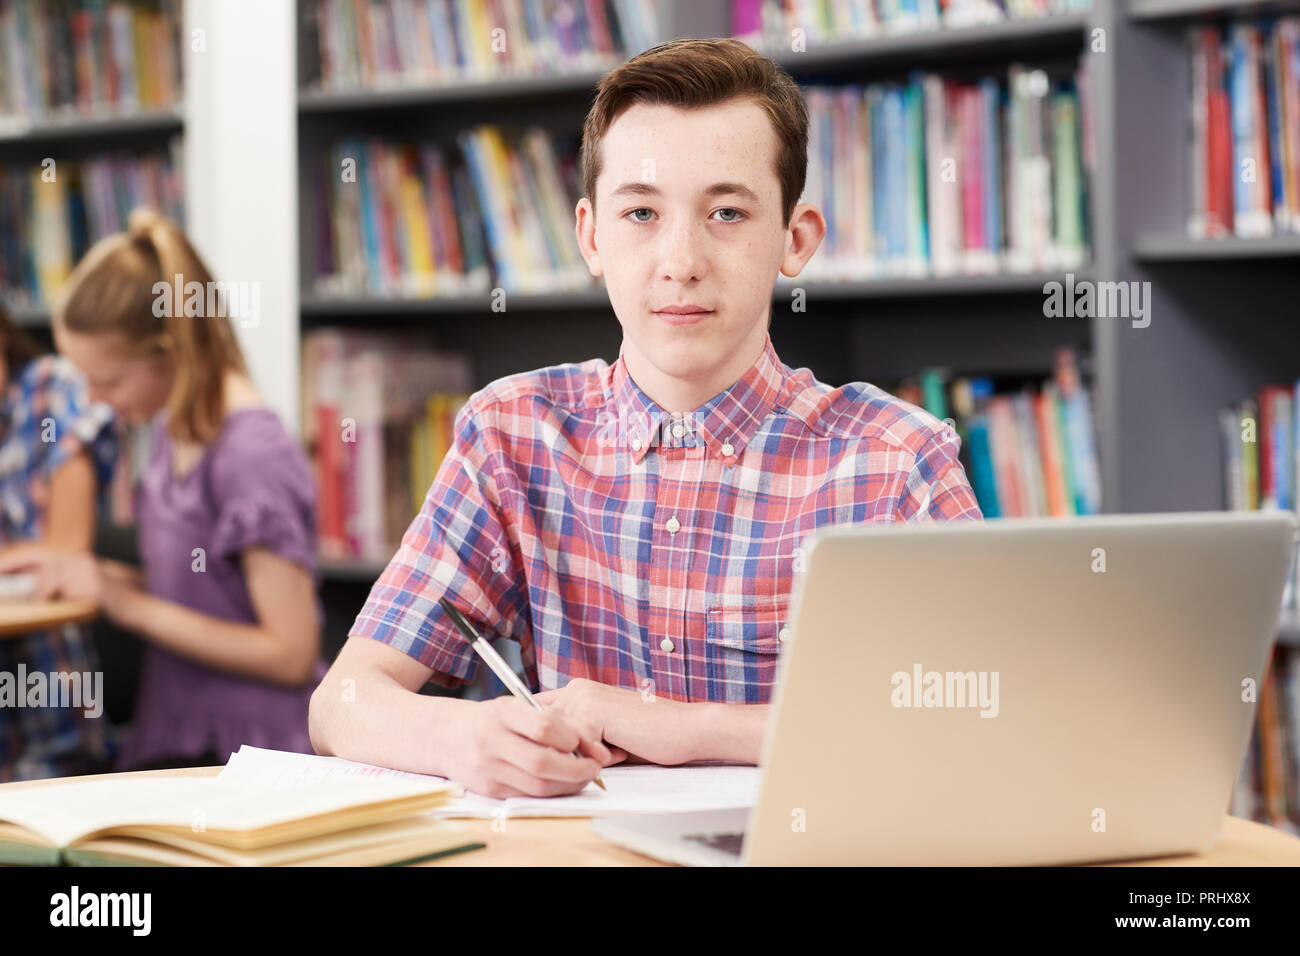 Portrait Of Male High School Student Working At Laptop In Library Stock Photo